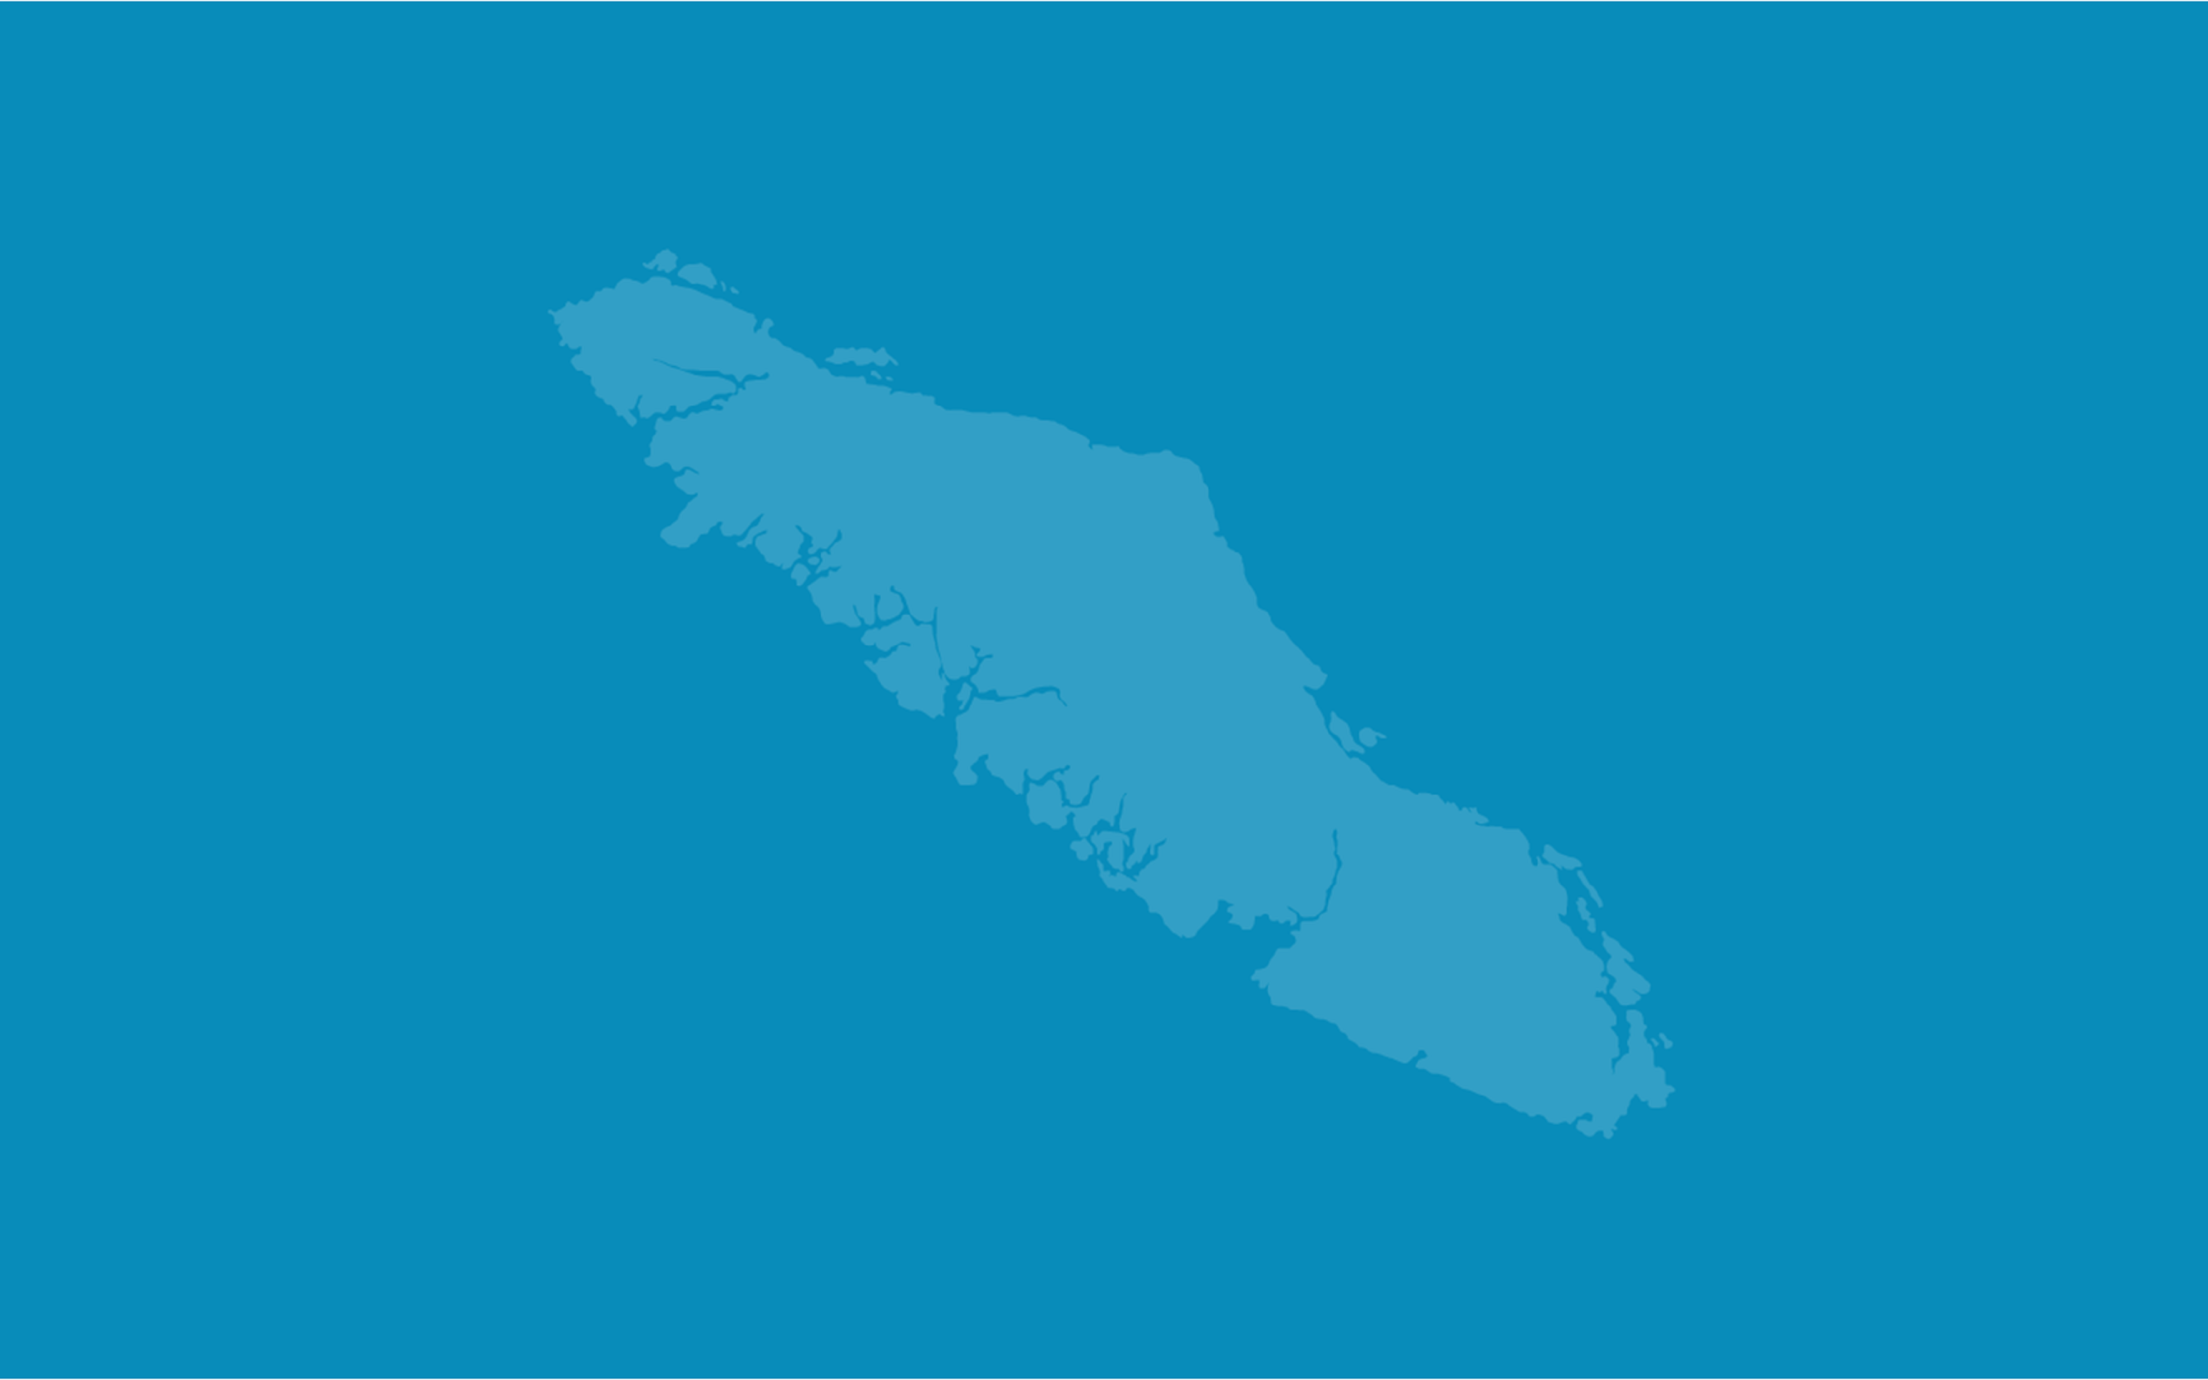 An image of Vancouver Island on a blue background